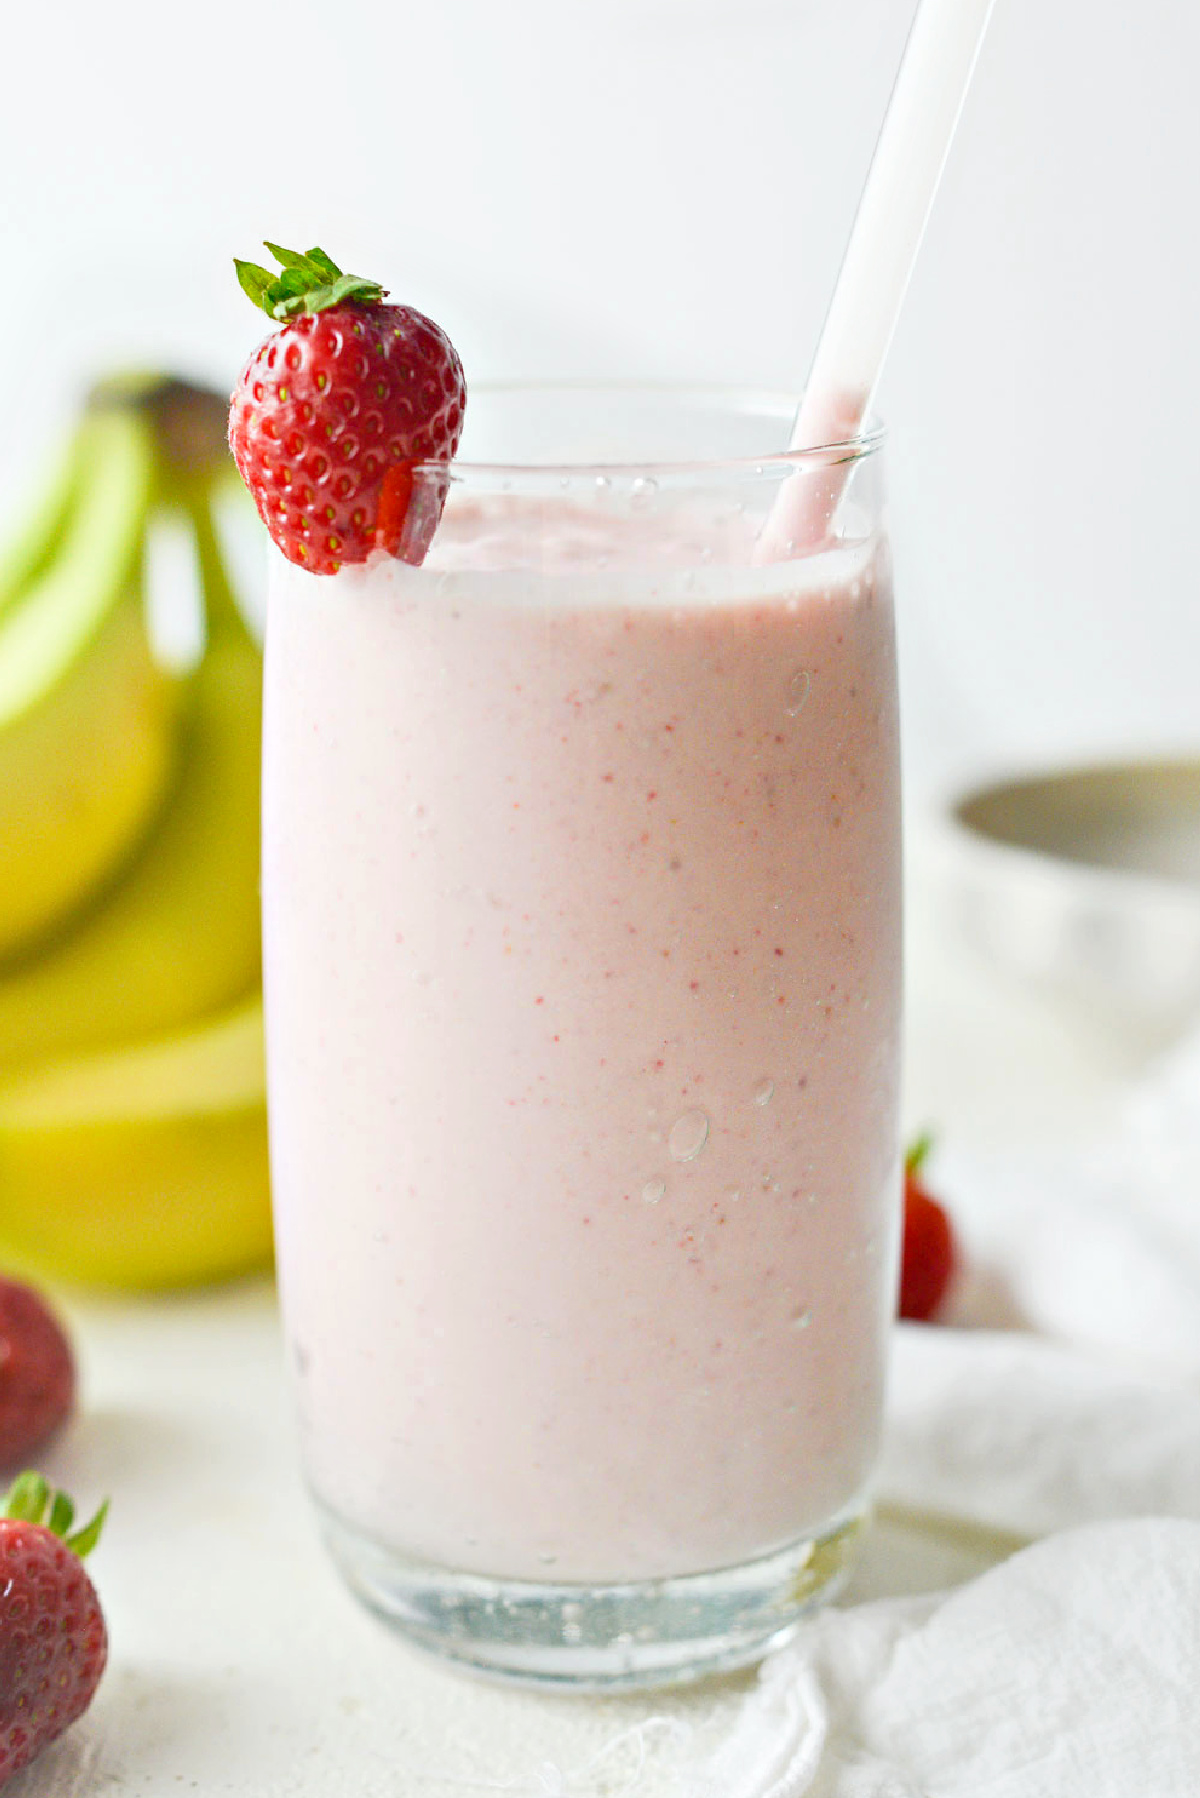 https://www.simplyscratch.com/wp-content/uploads/2023/05/Strawberry-Banana-Smoothie-l-SimplyScratch-08.jpg